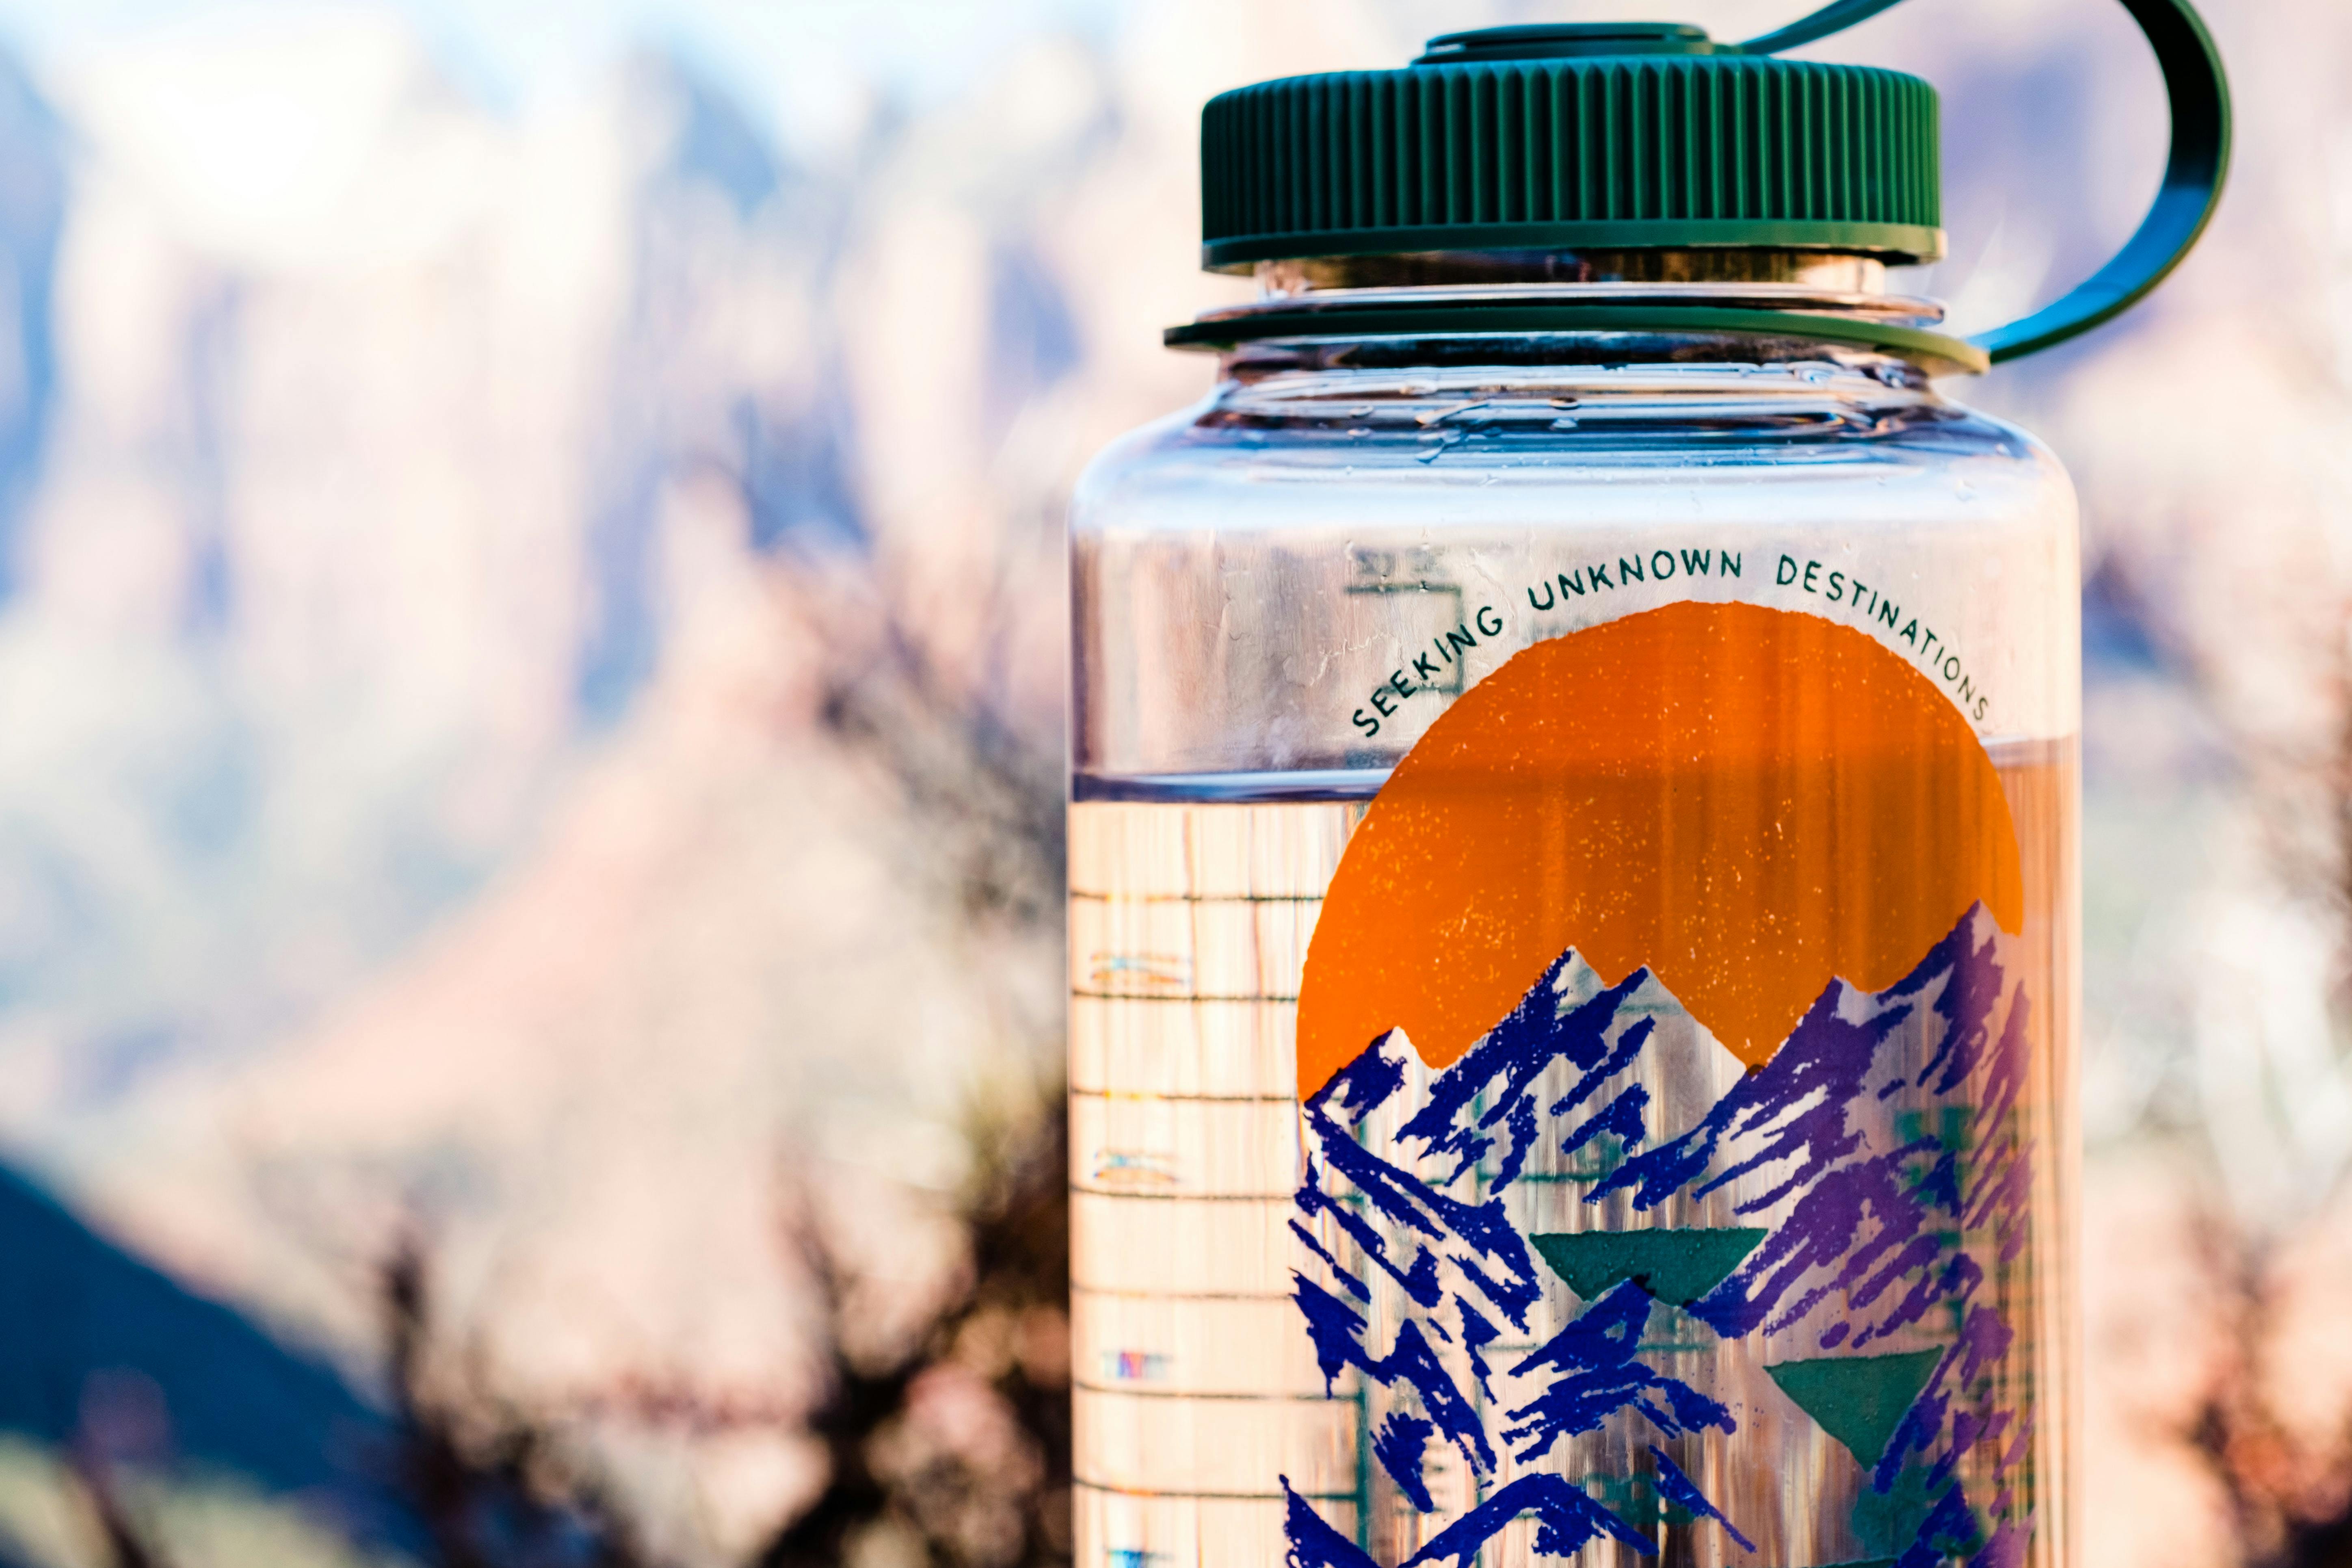 A clear Nalgene water bottle with a green lid and a mountain graphic that says "Seeking Unknown Destinations" on it.